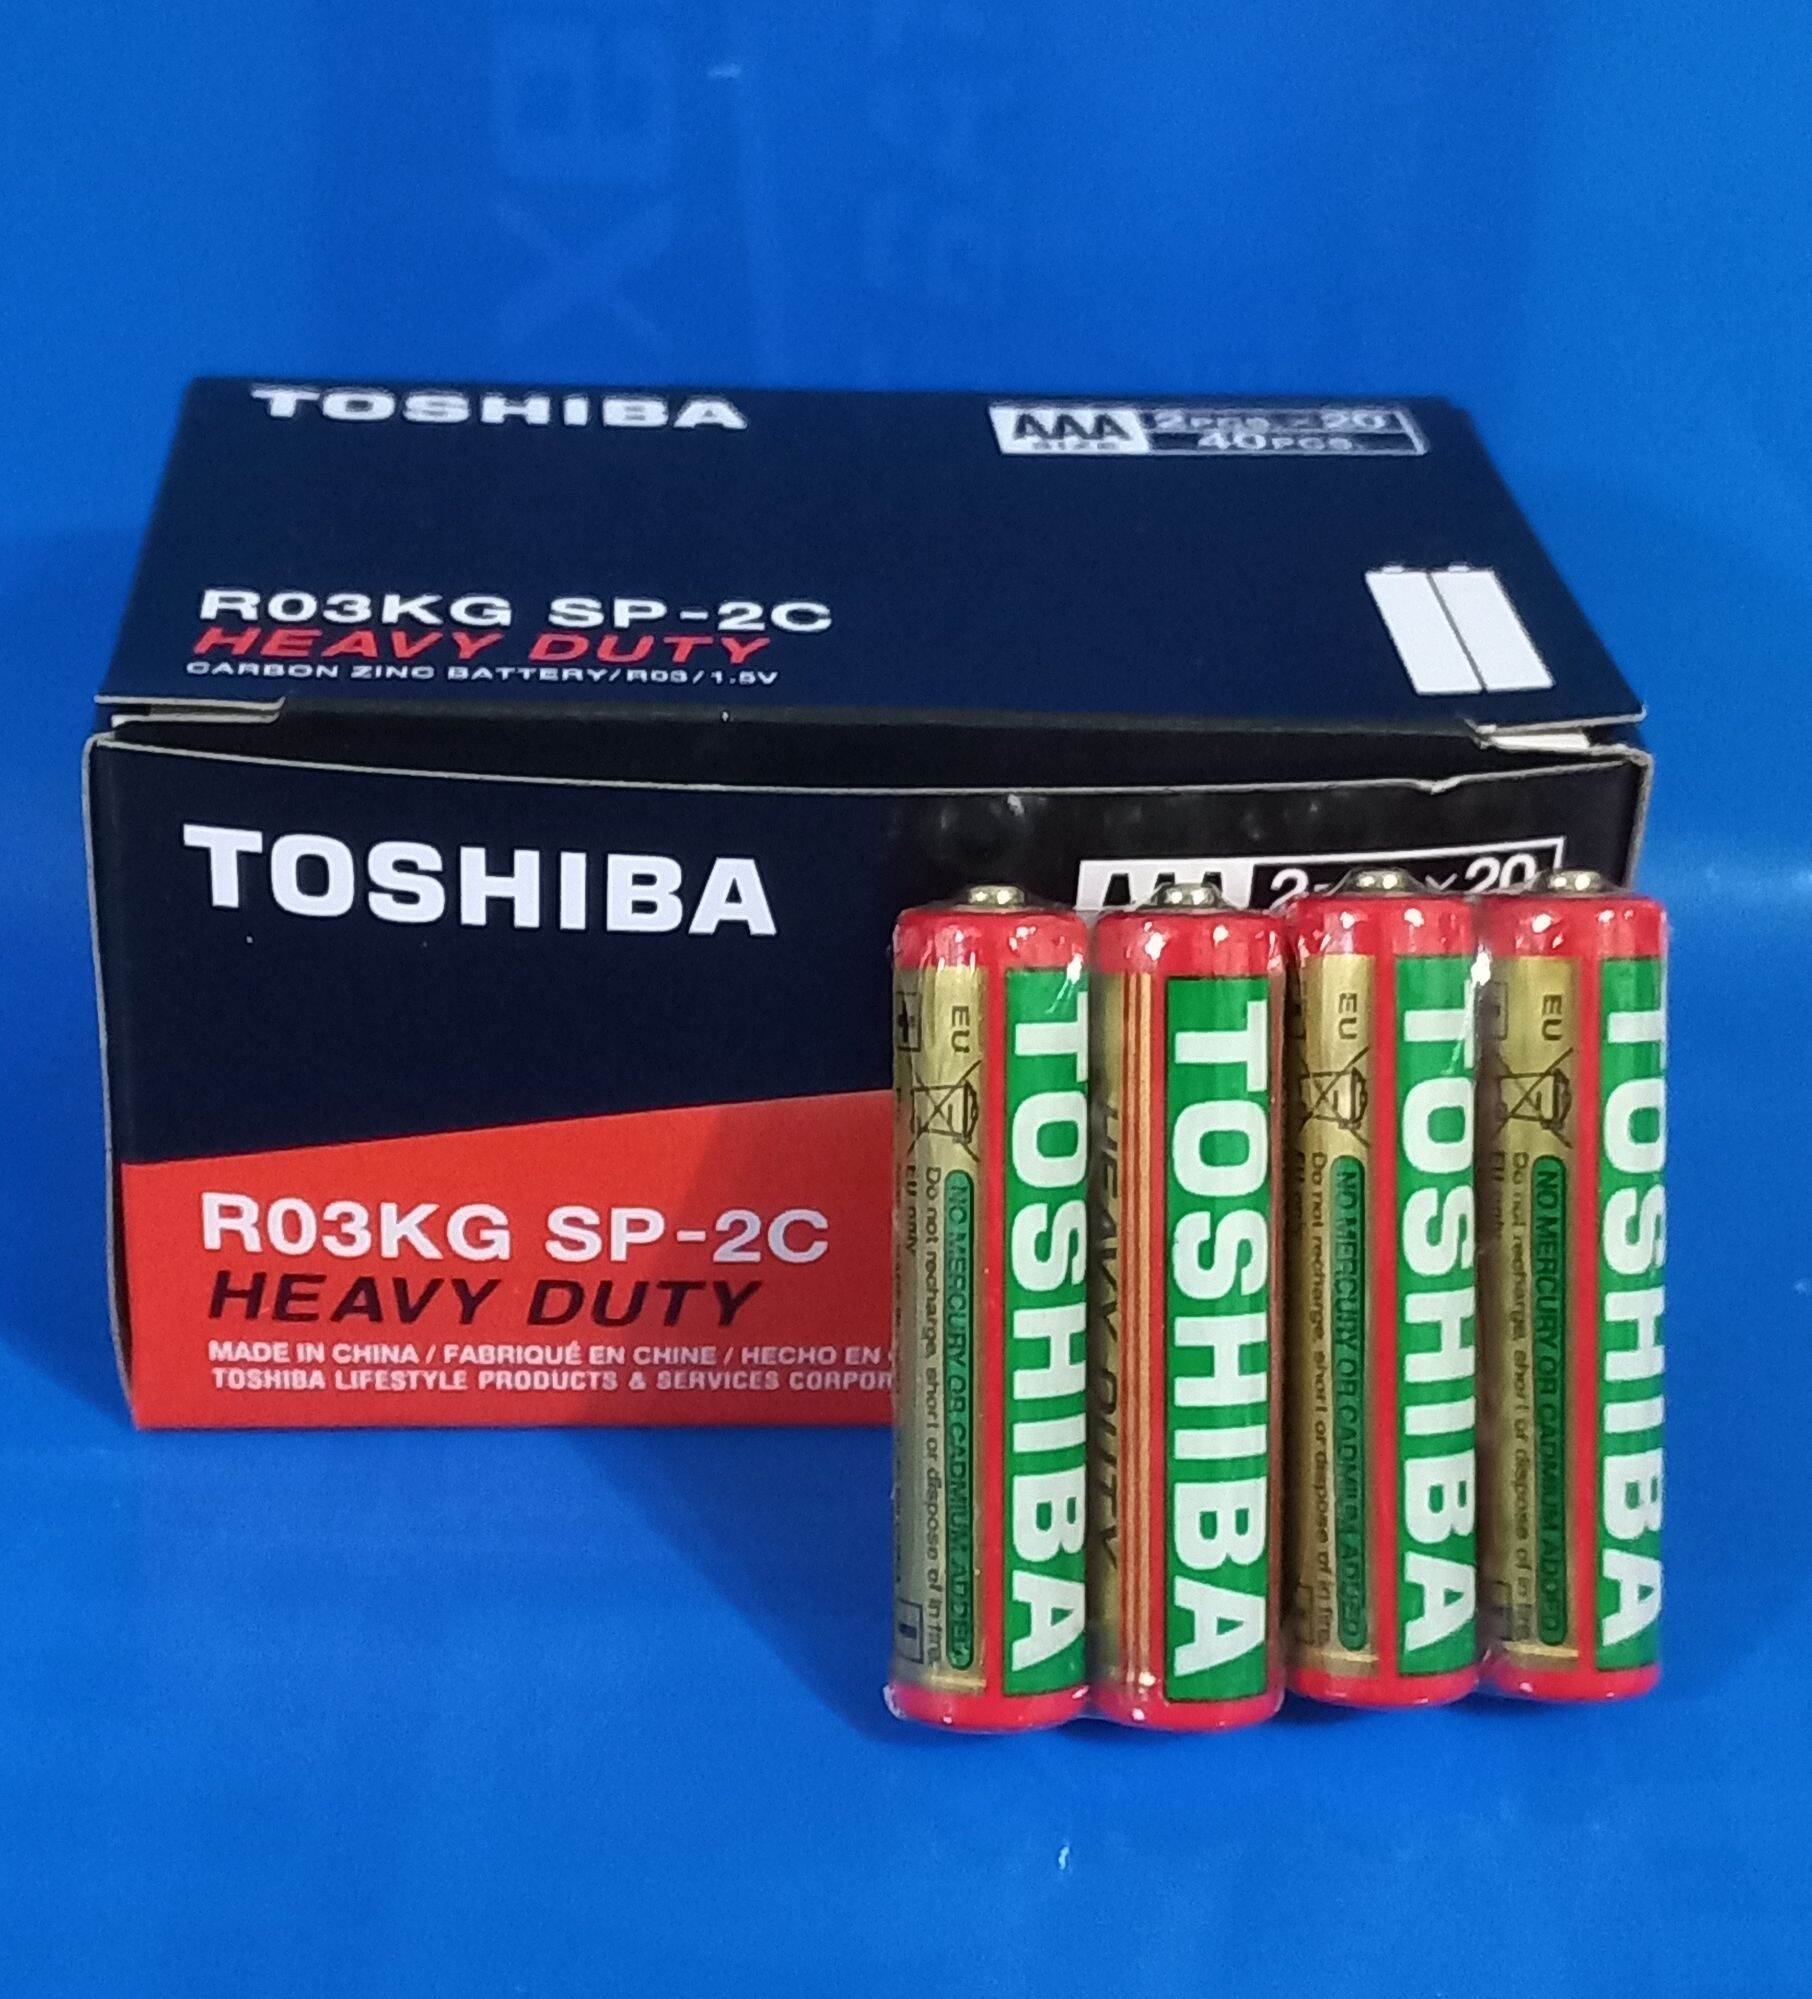 CR1616 Toshiba Lifestyle Products, Battery Products